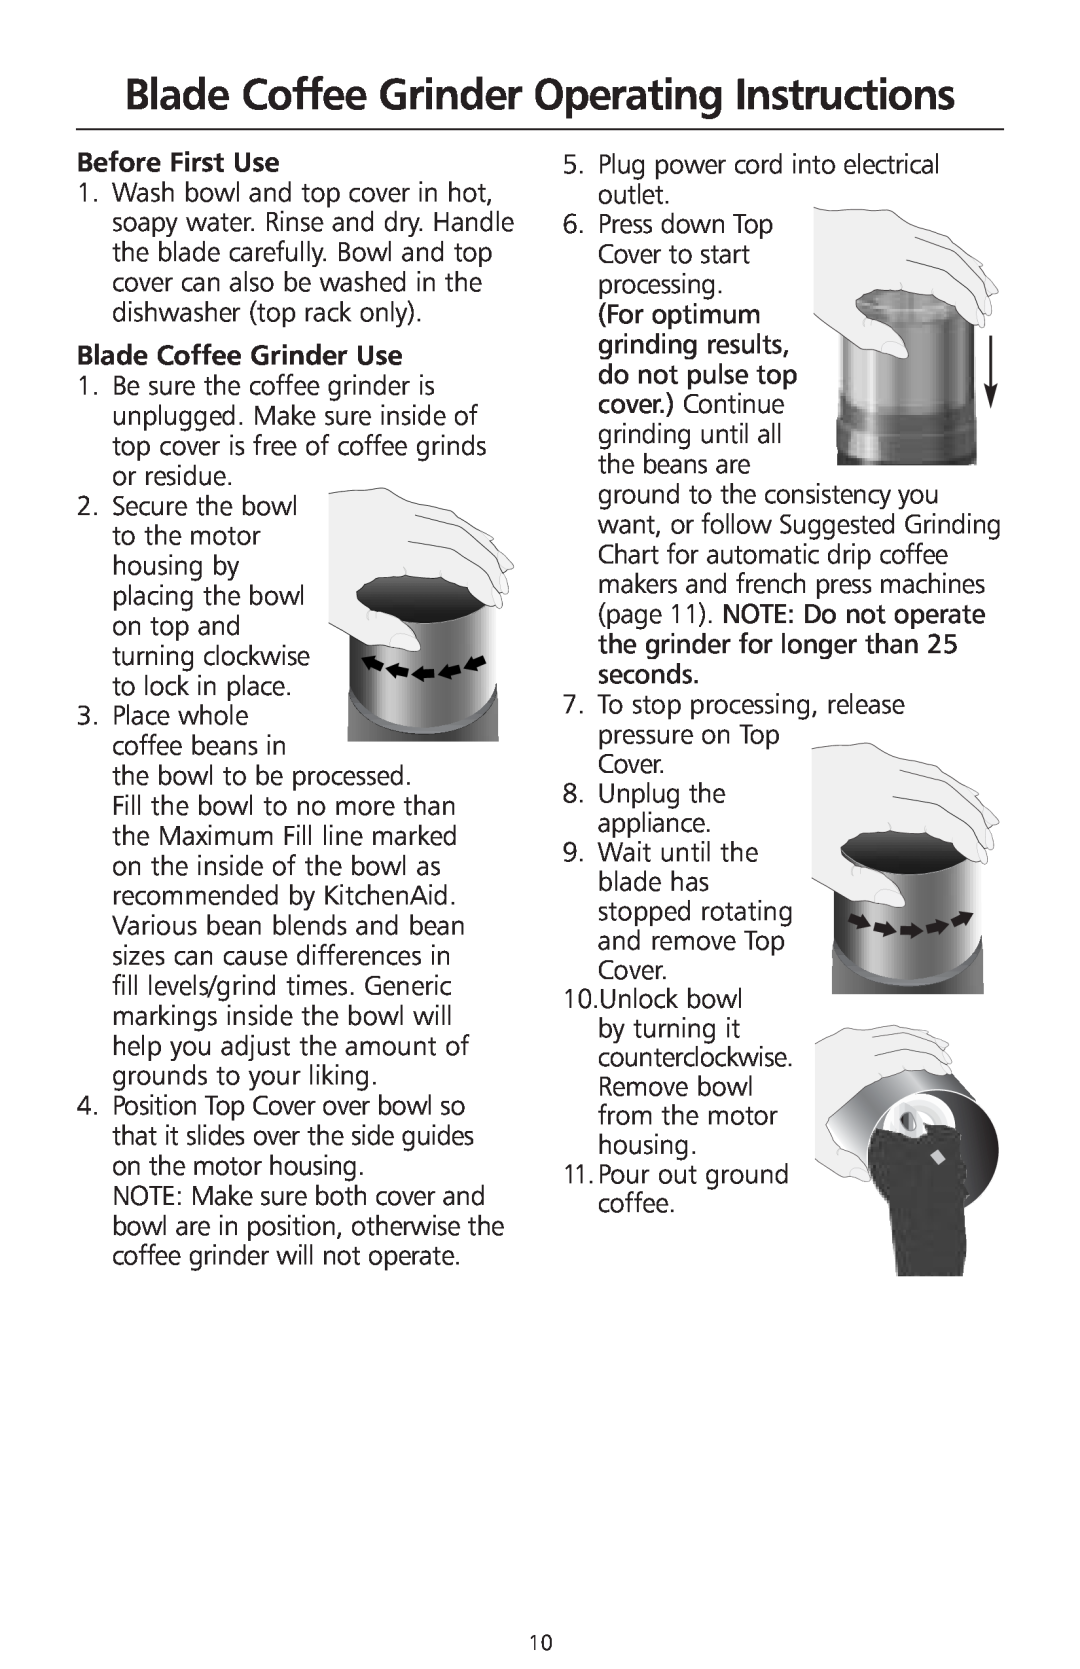 KitchenAid 2633 manual Blade Coffee Grinder Operating Instructions, Before First Use, Blade Coffee Grinder Use 